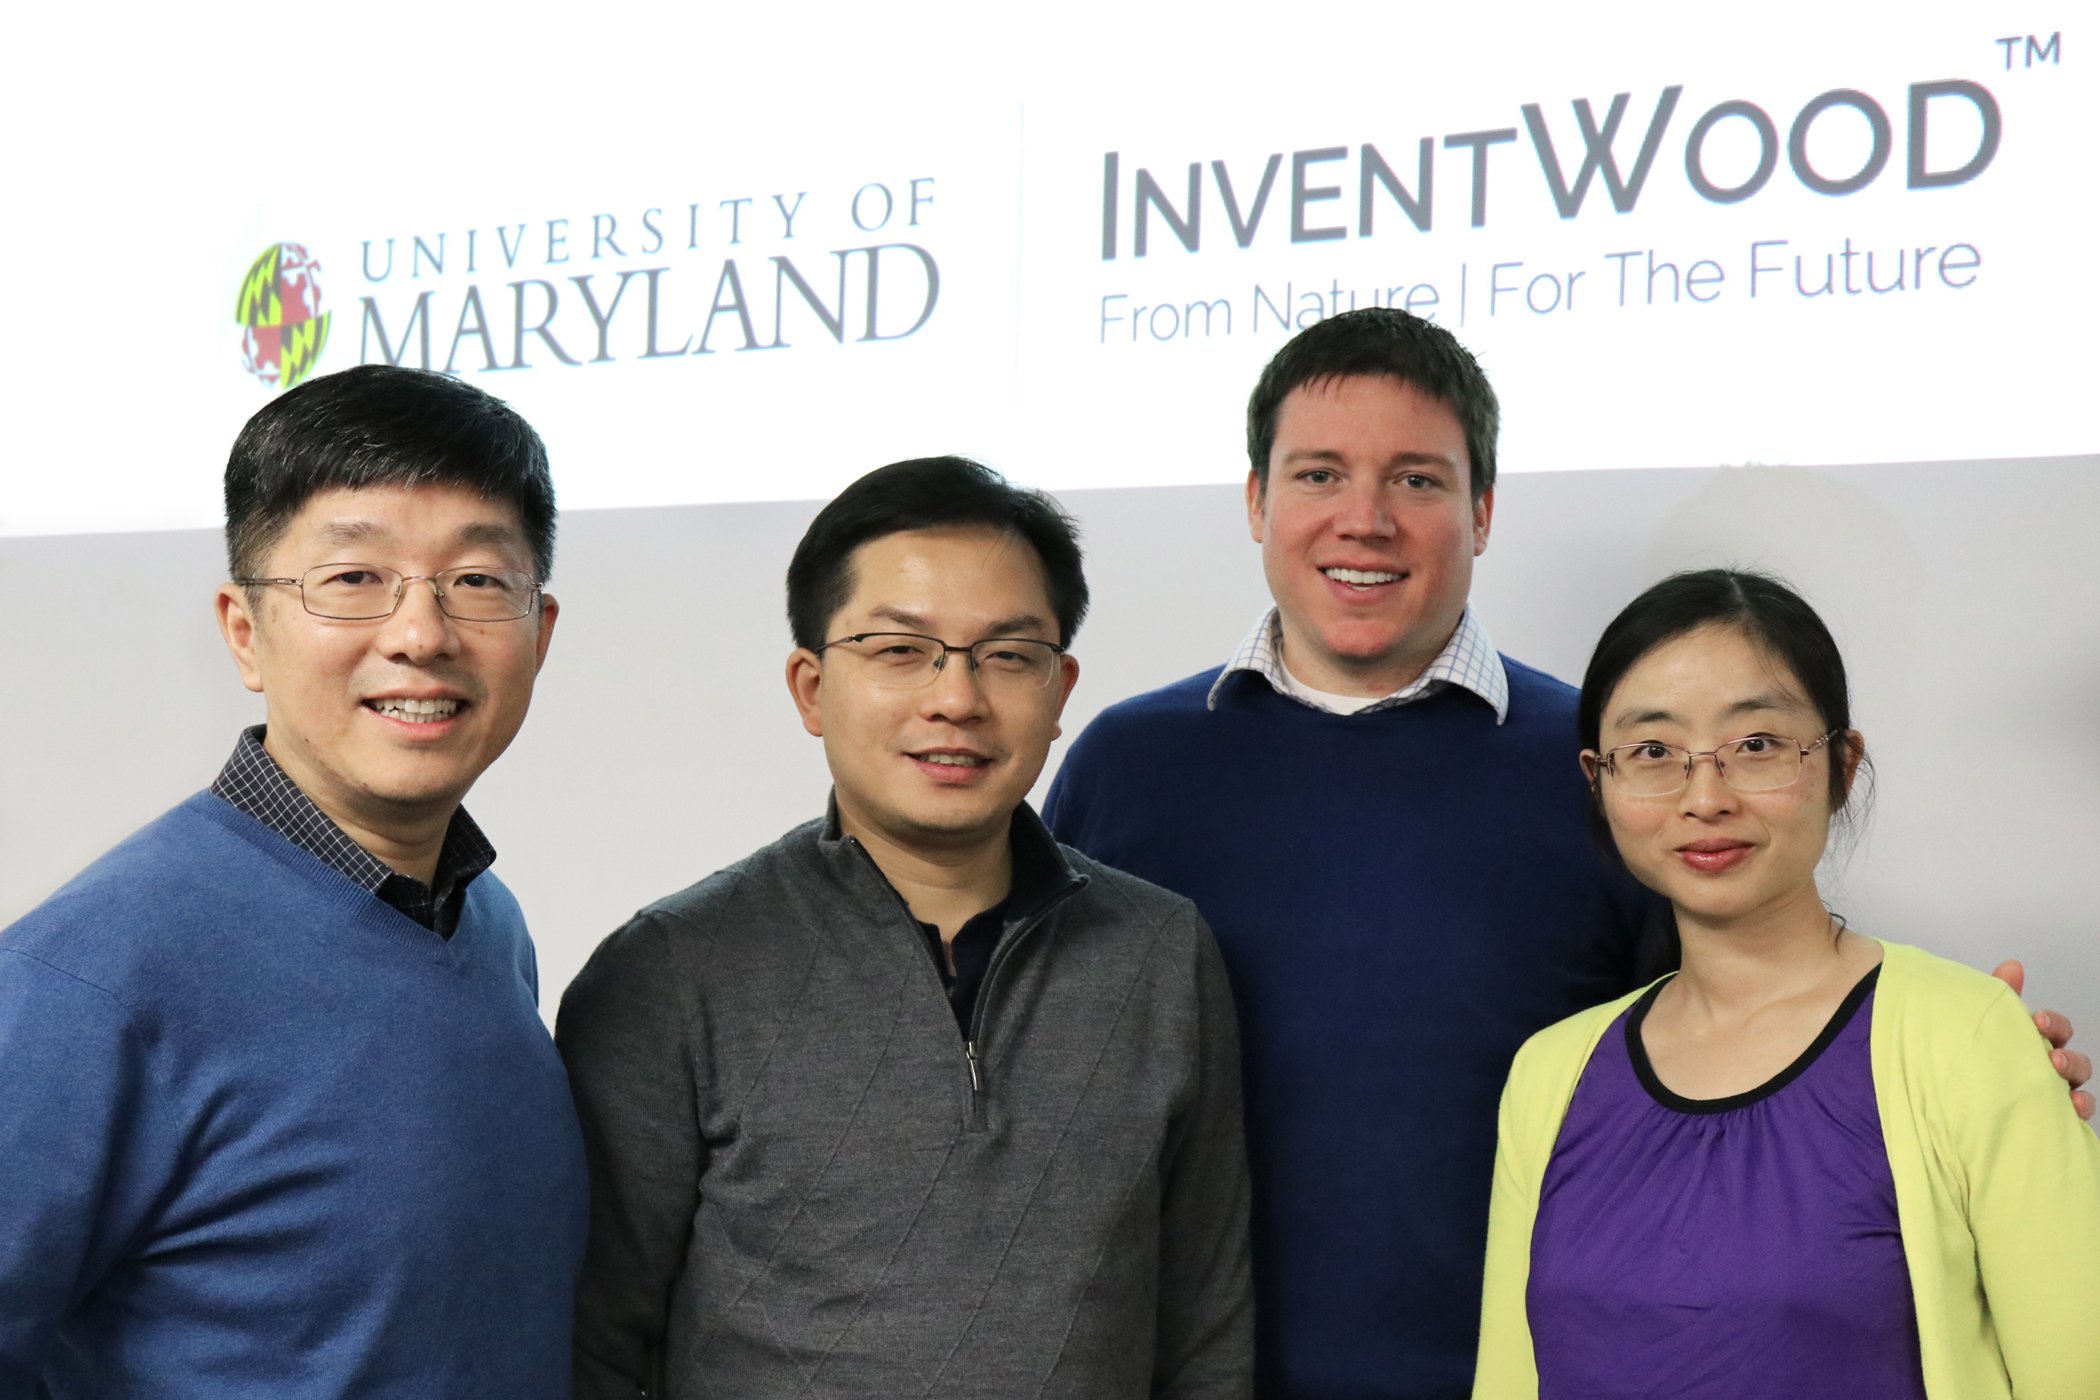 Left to right: Dr. Teng Li (Co-PI, UMD), Dr. Liangbing Hu (PI, UMD), Josh Cable (Inventwood LLC) and Amy Gong (Inventwood LLC)